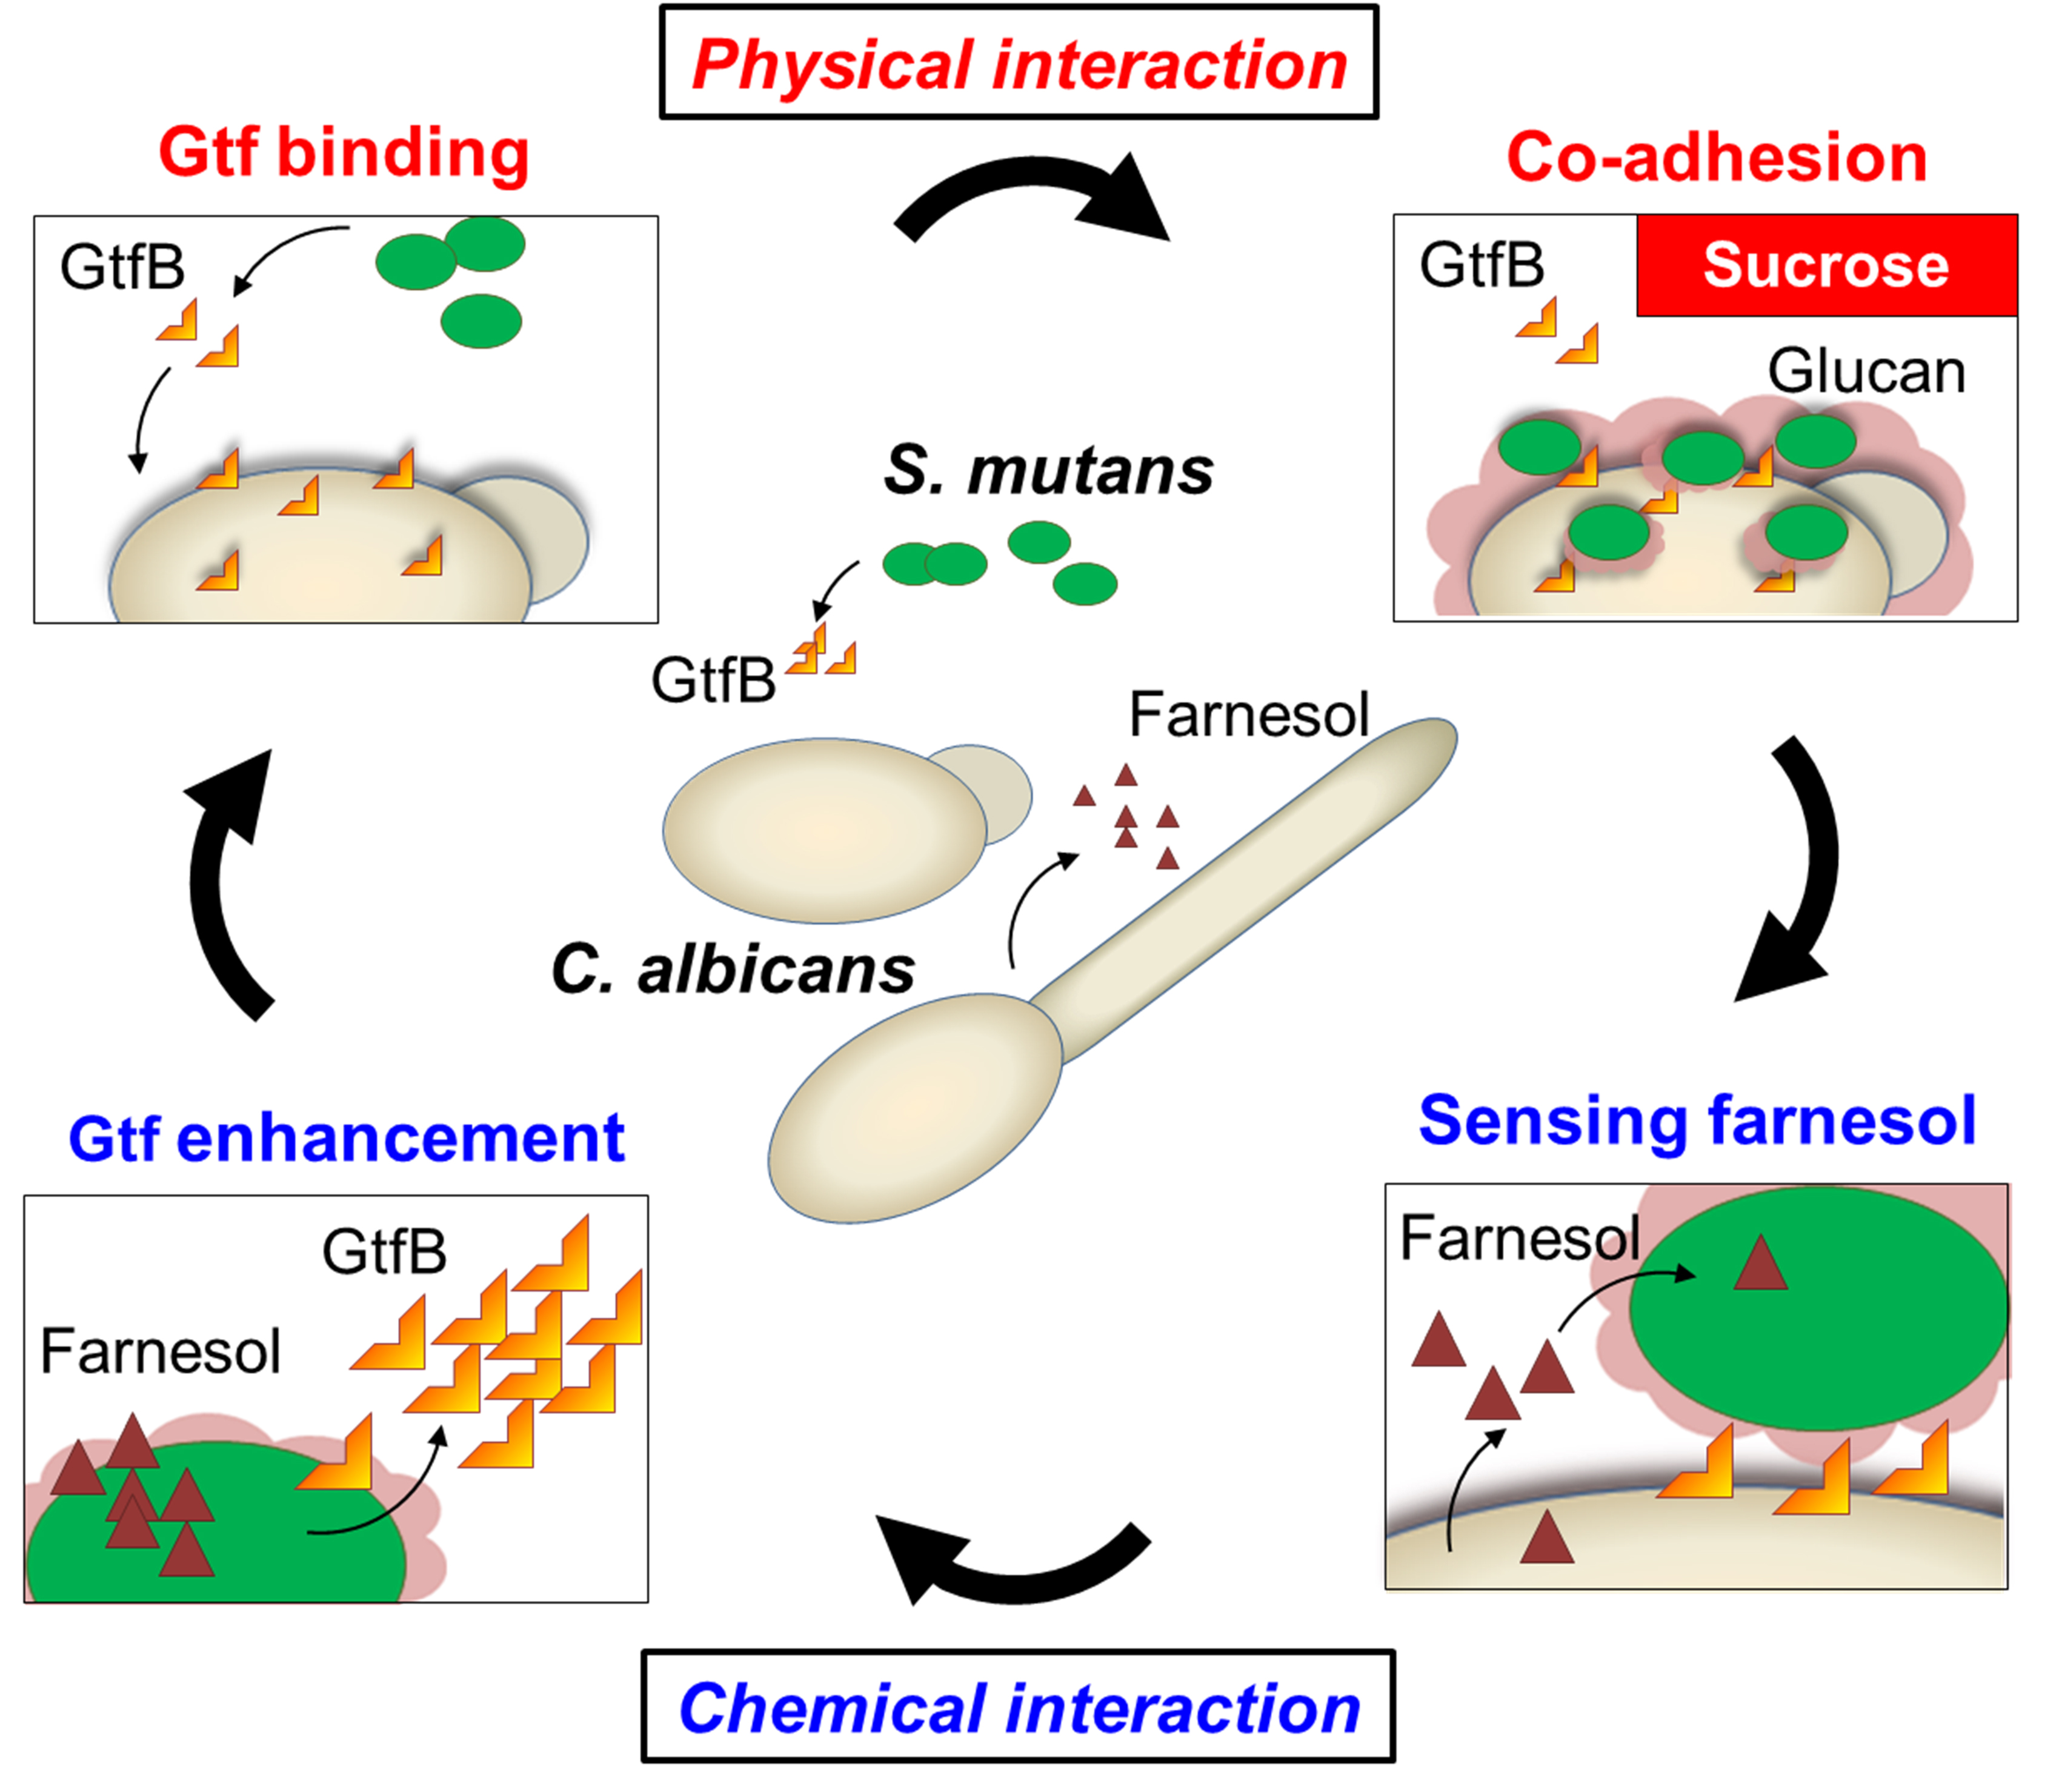 Physicochemical interactions between S. mutans and C. albicans